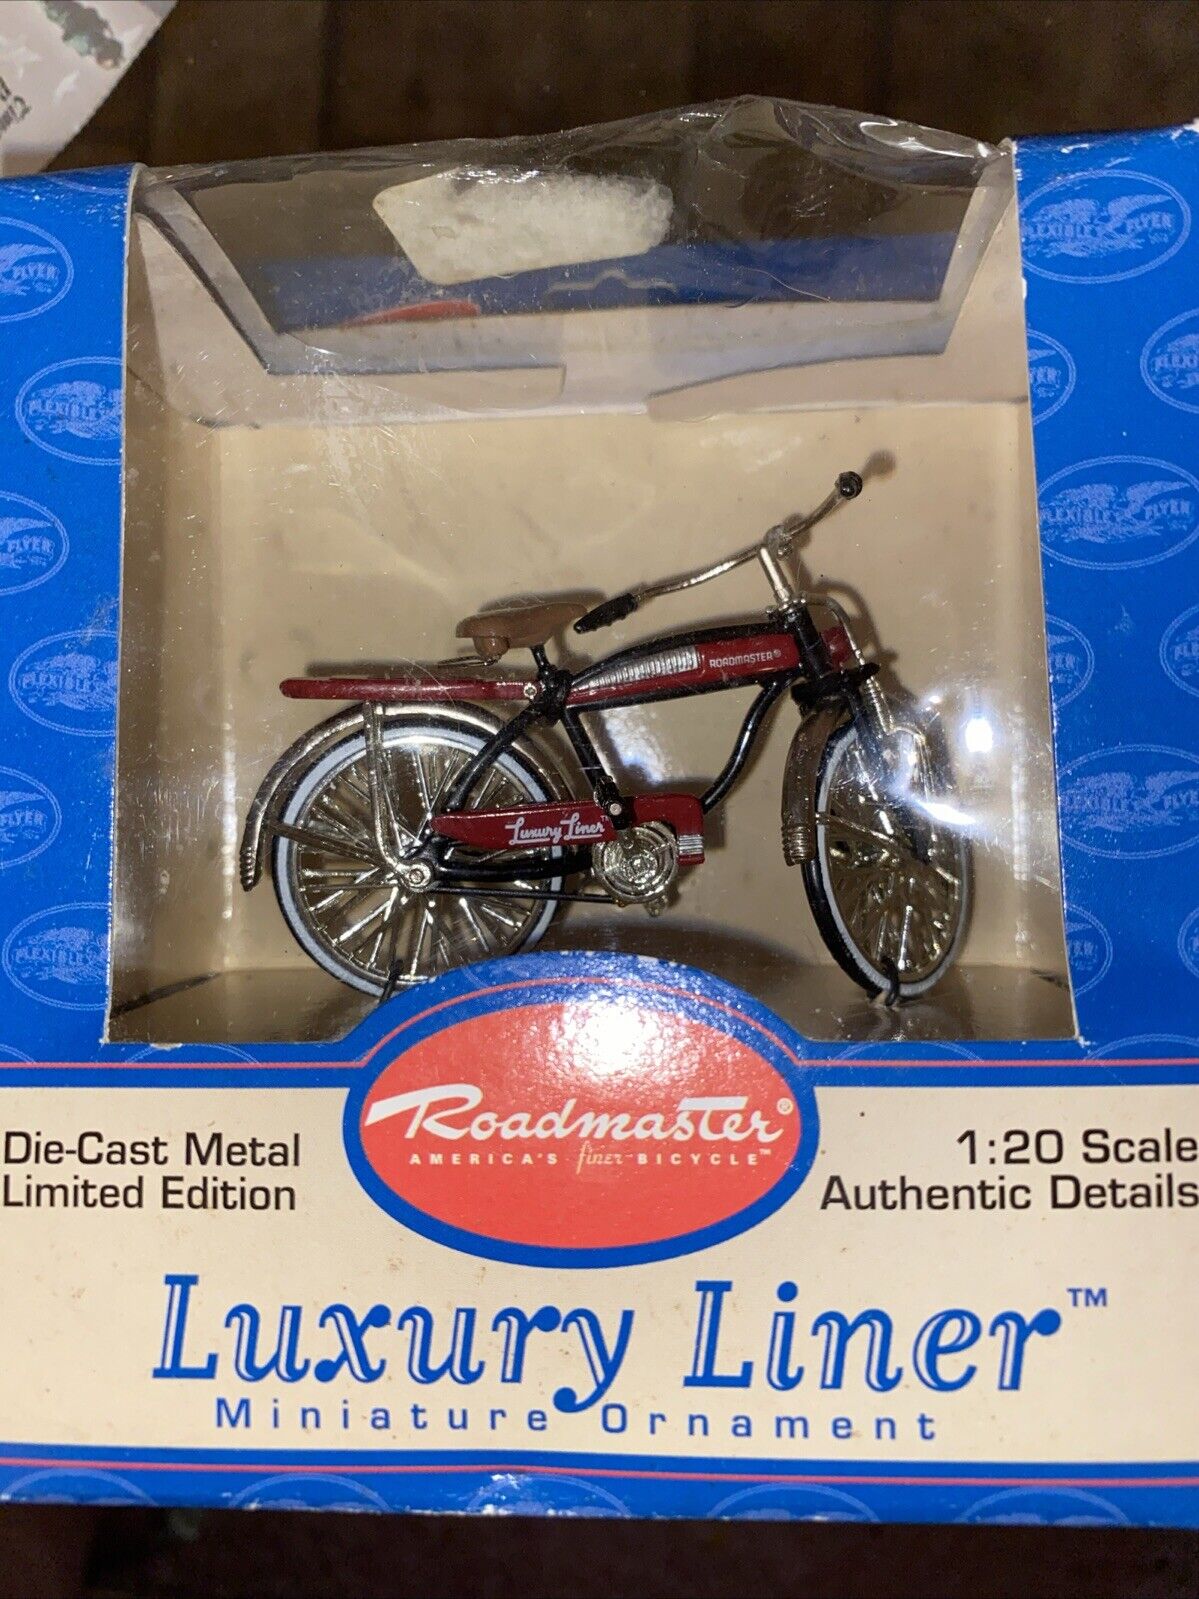 Roadmaster Luxury Liner BICYCLE miniature Ornament 1/20 scale in DAMAGED box